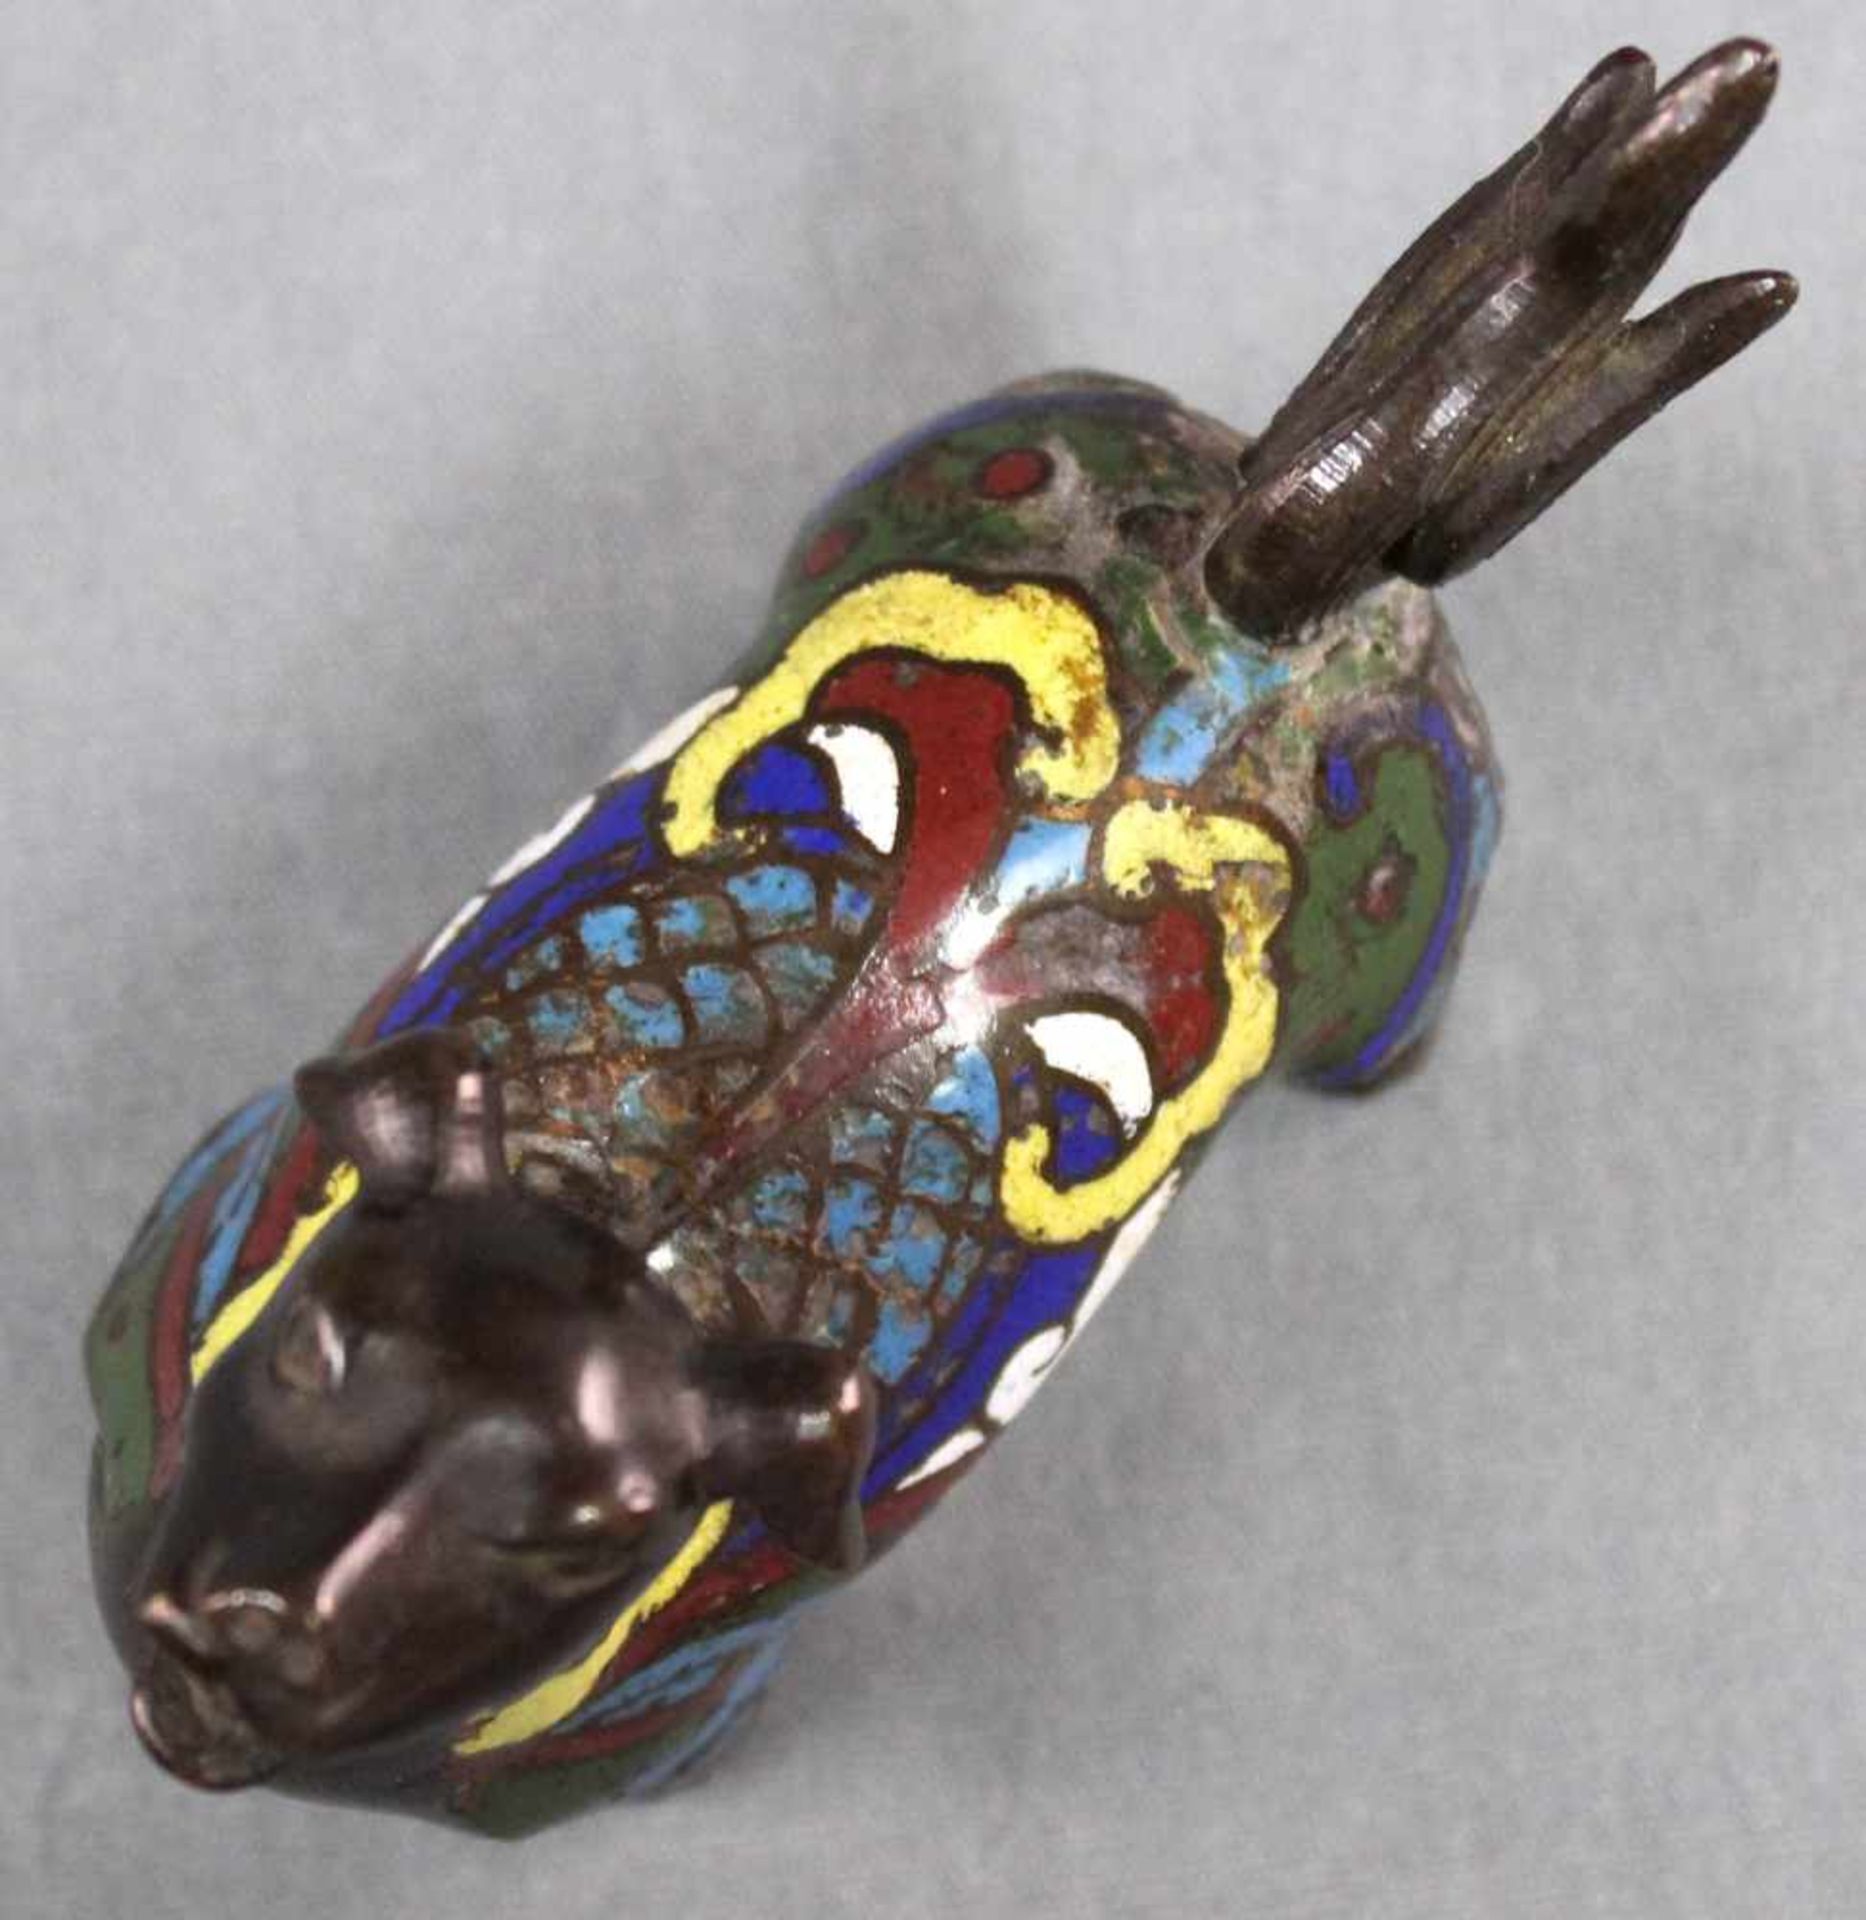 Bronze dog with cloisonne. Proably China old. 10 cm long. - Image 6 of 7